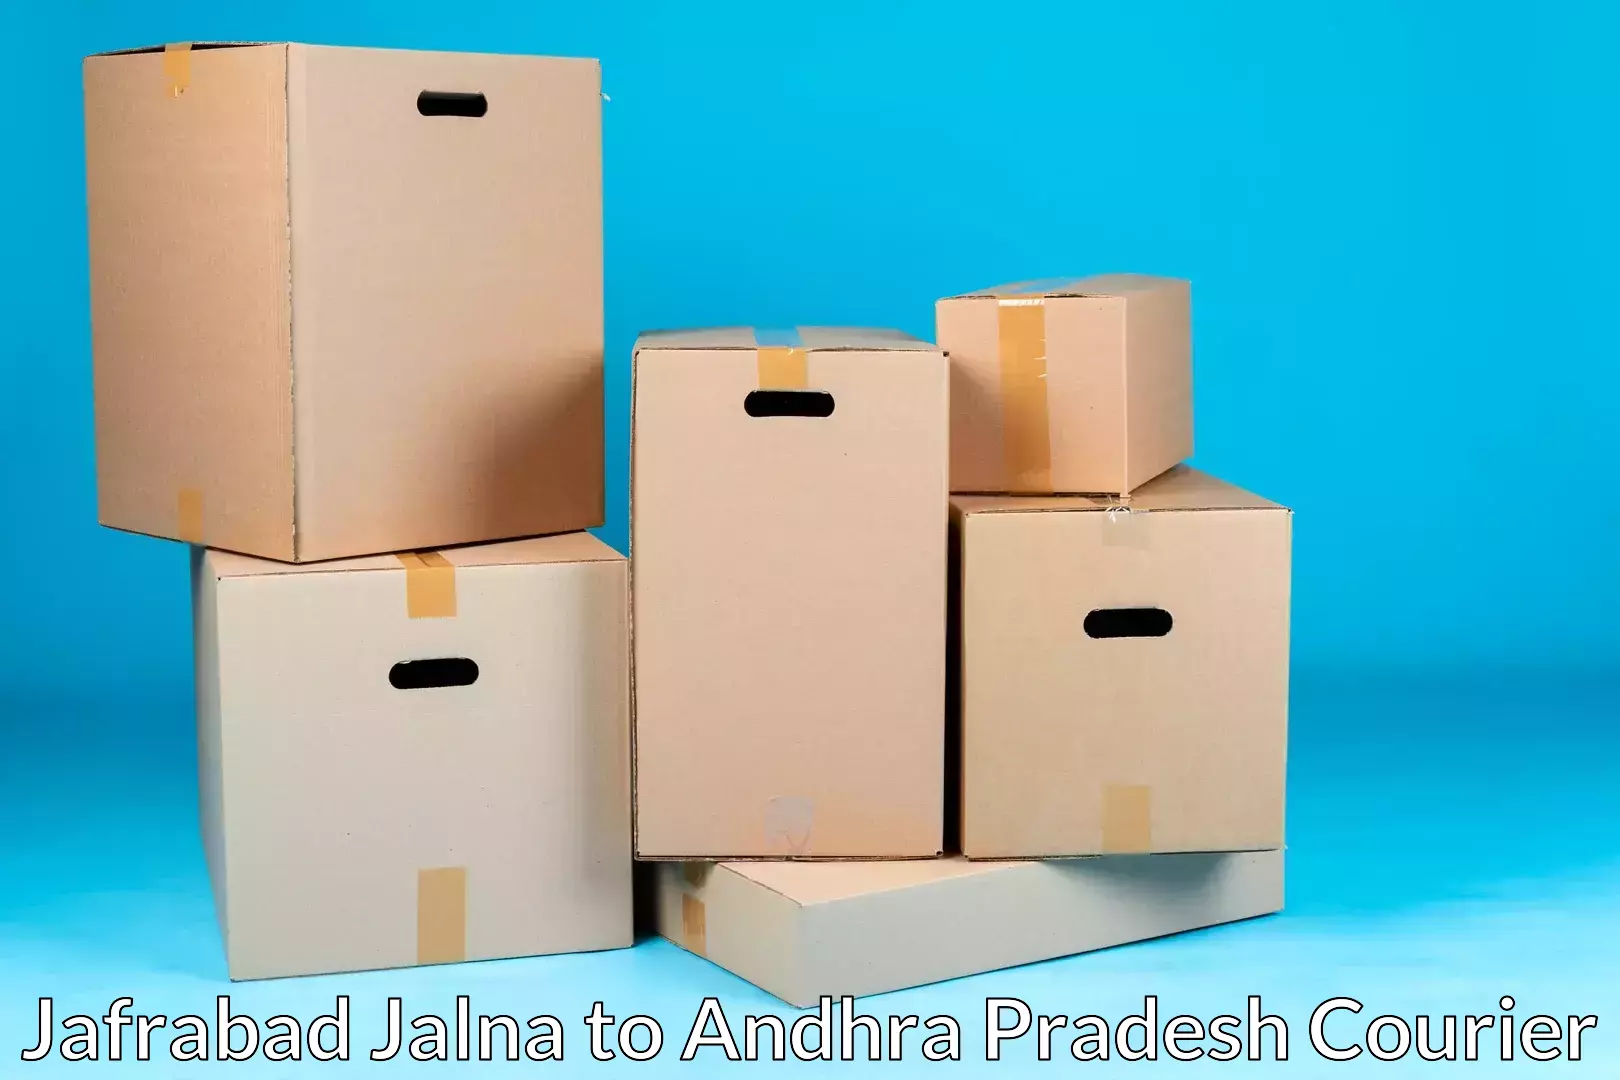 Specialized moving company in Jafrabad Jalna to Visakhapatnam Port